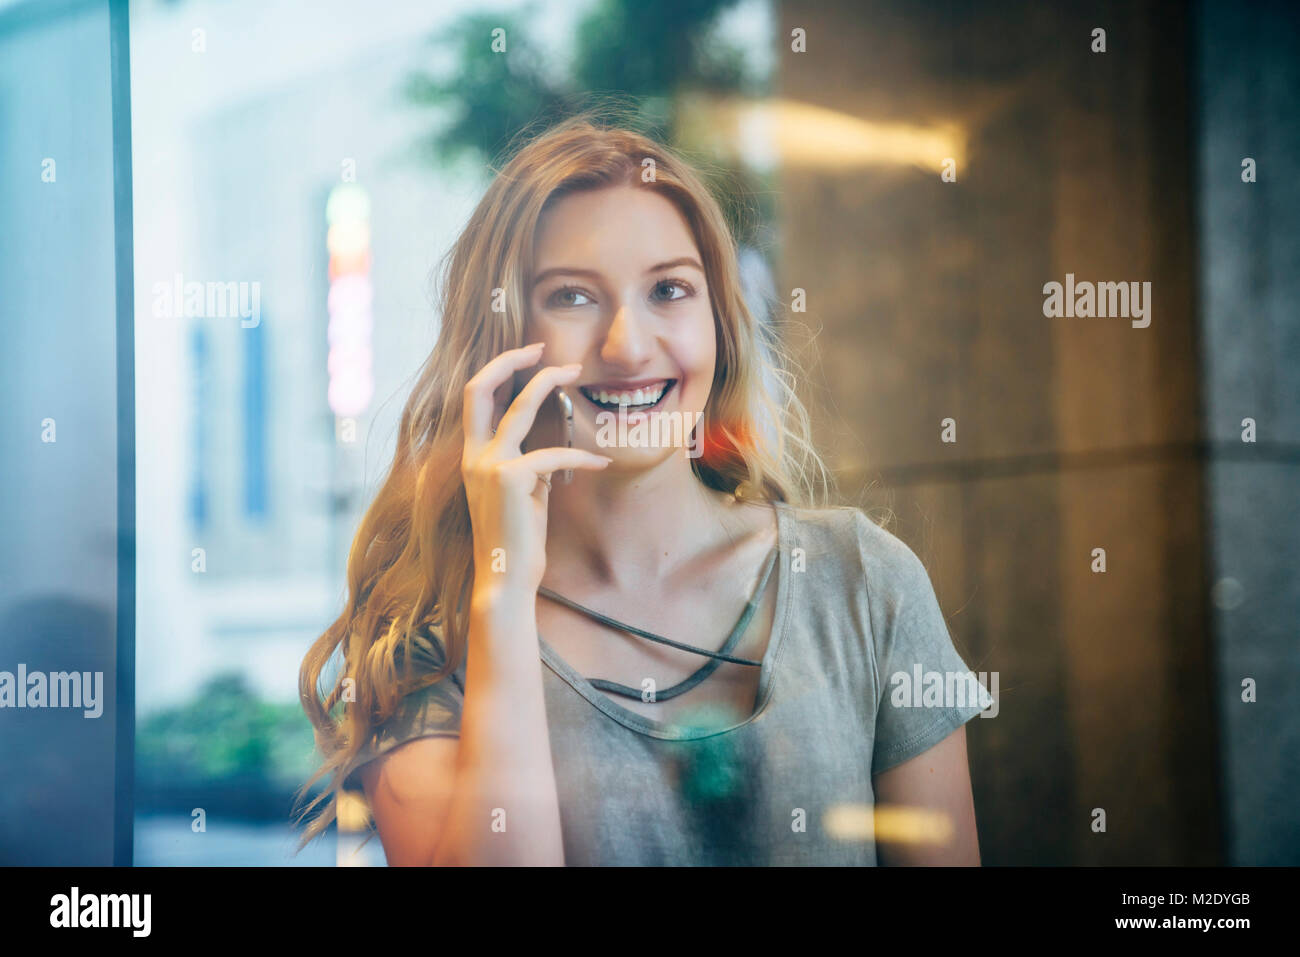 Smiling Caucasian woman talking on cell phone behind window Stock Photo